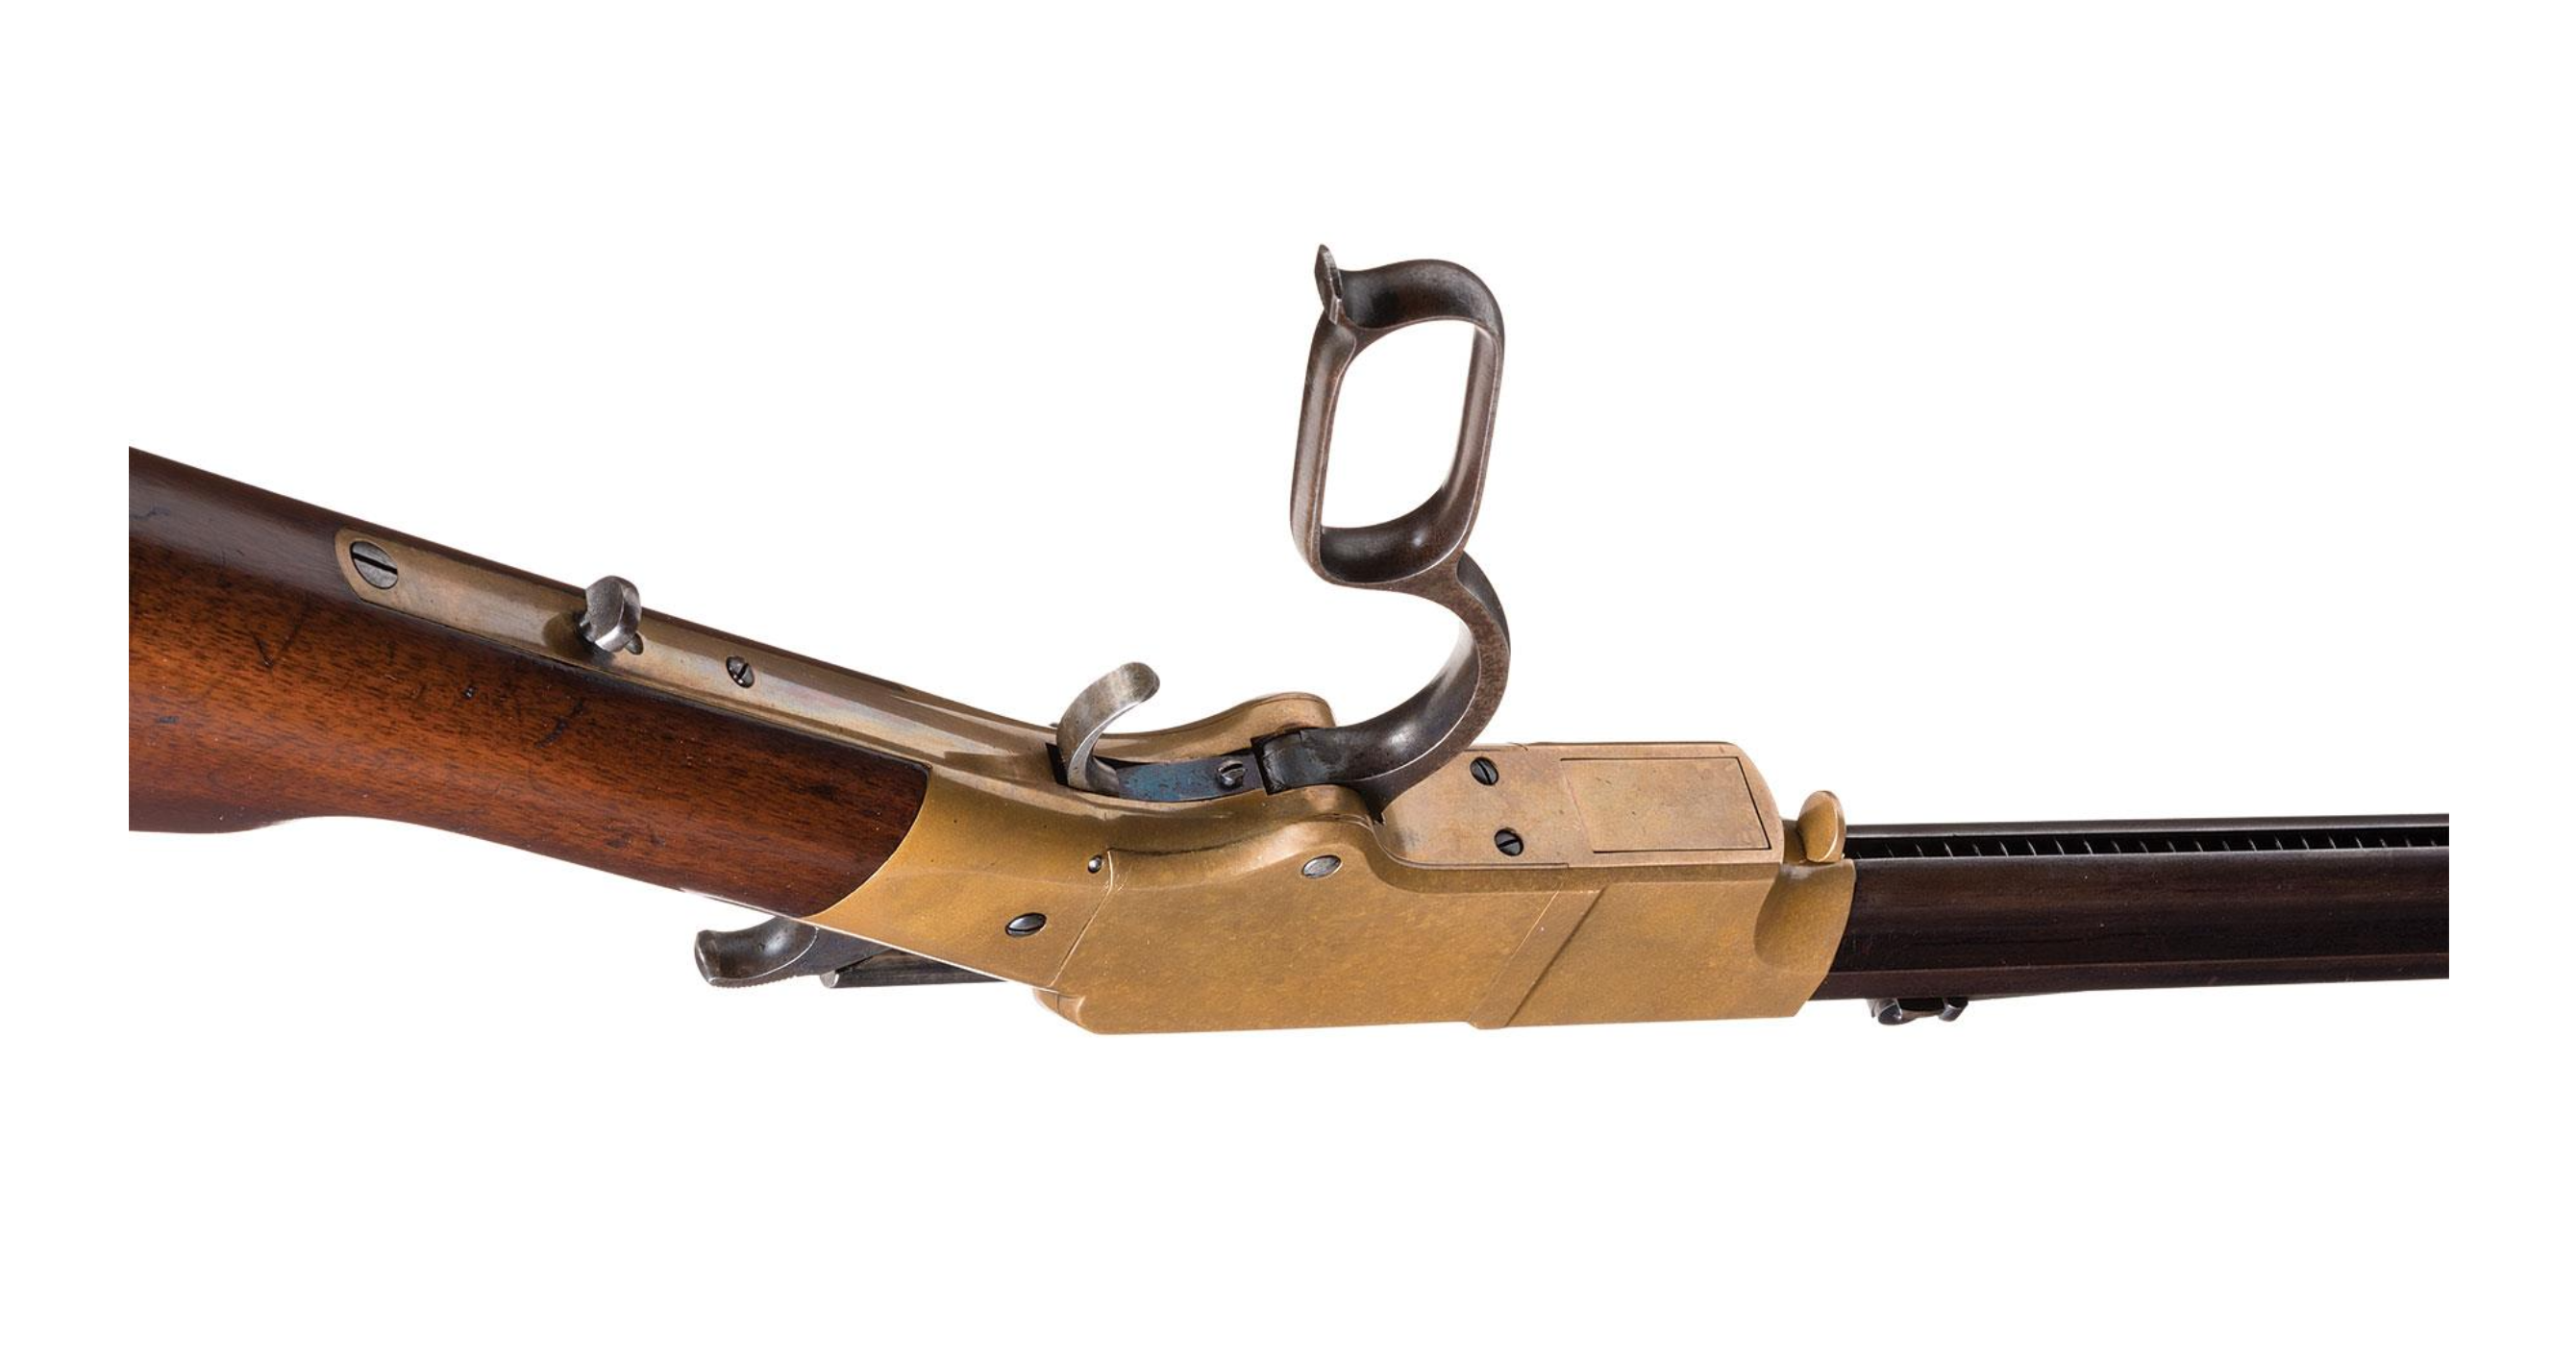 The first lever action rifle: the henry repeater